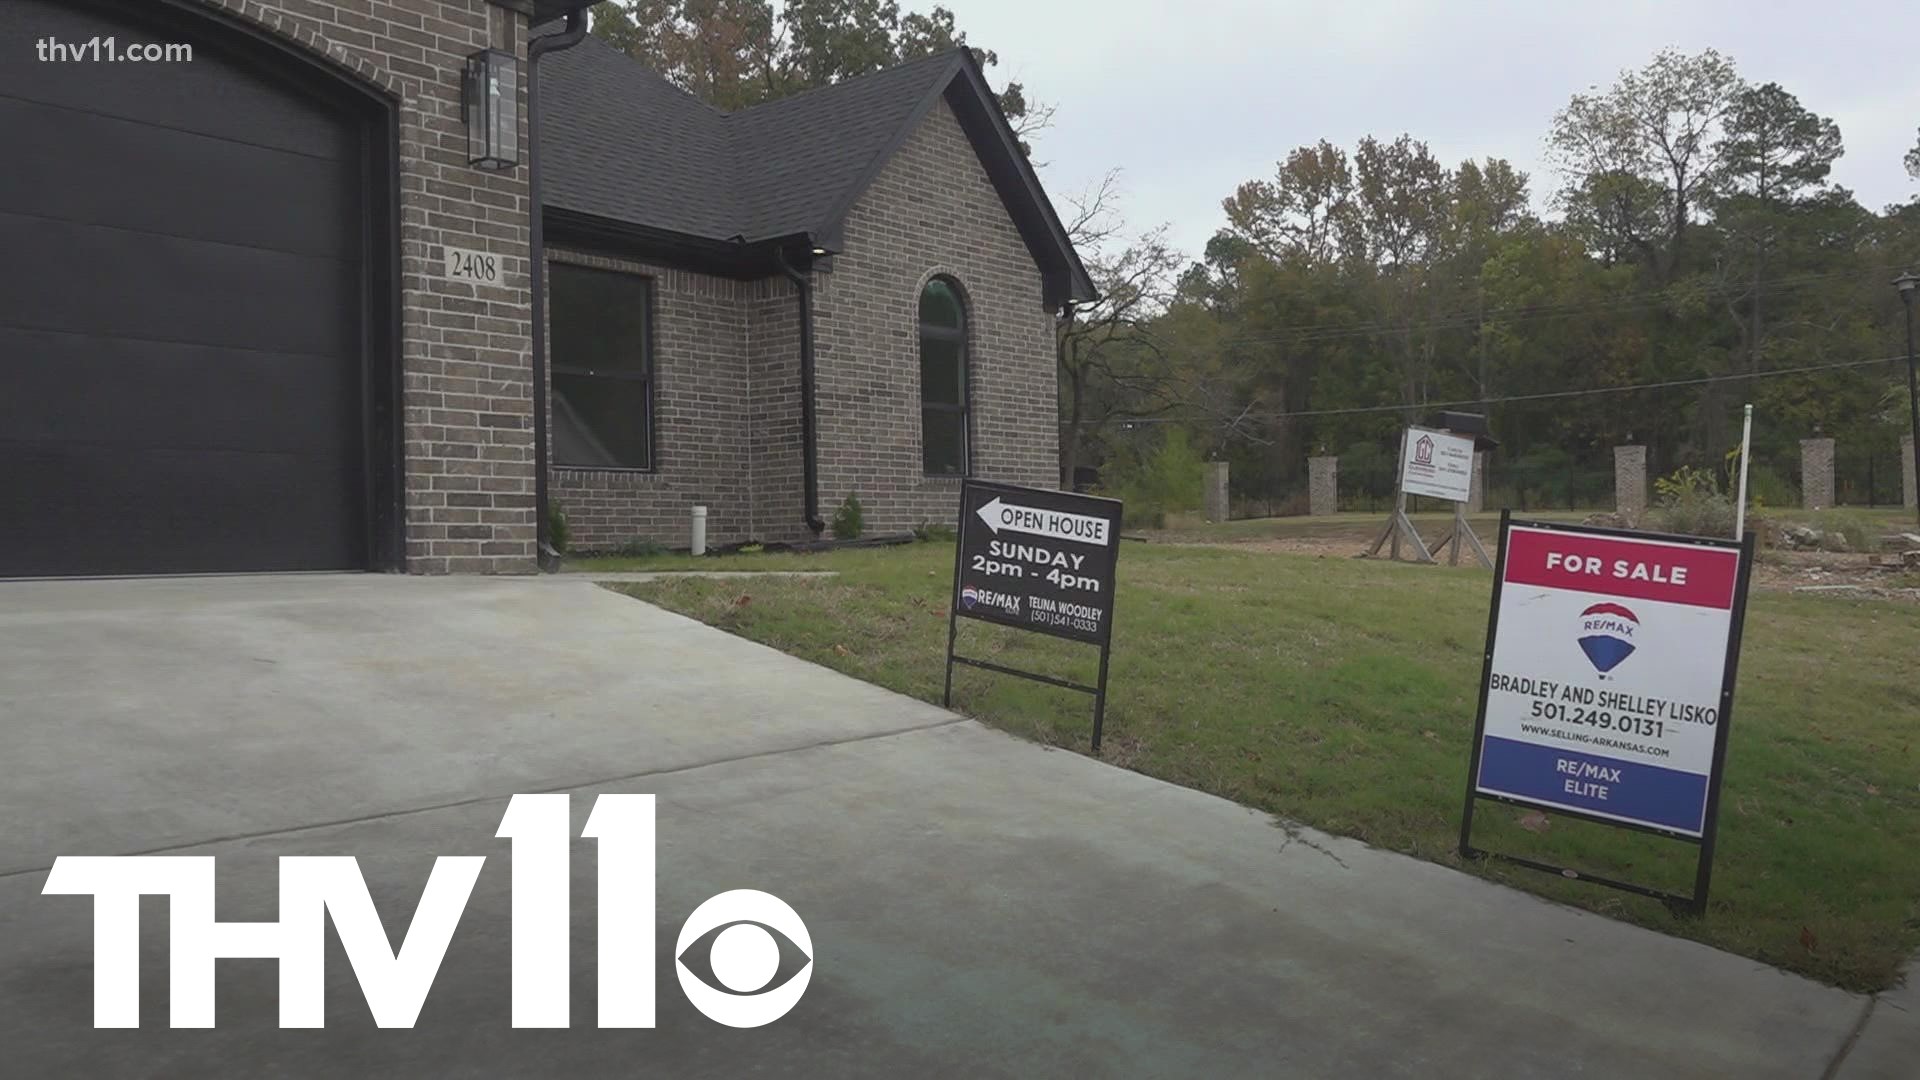 Realtors in Arkansas are saying that when showing homes, safety is their number one priority.